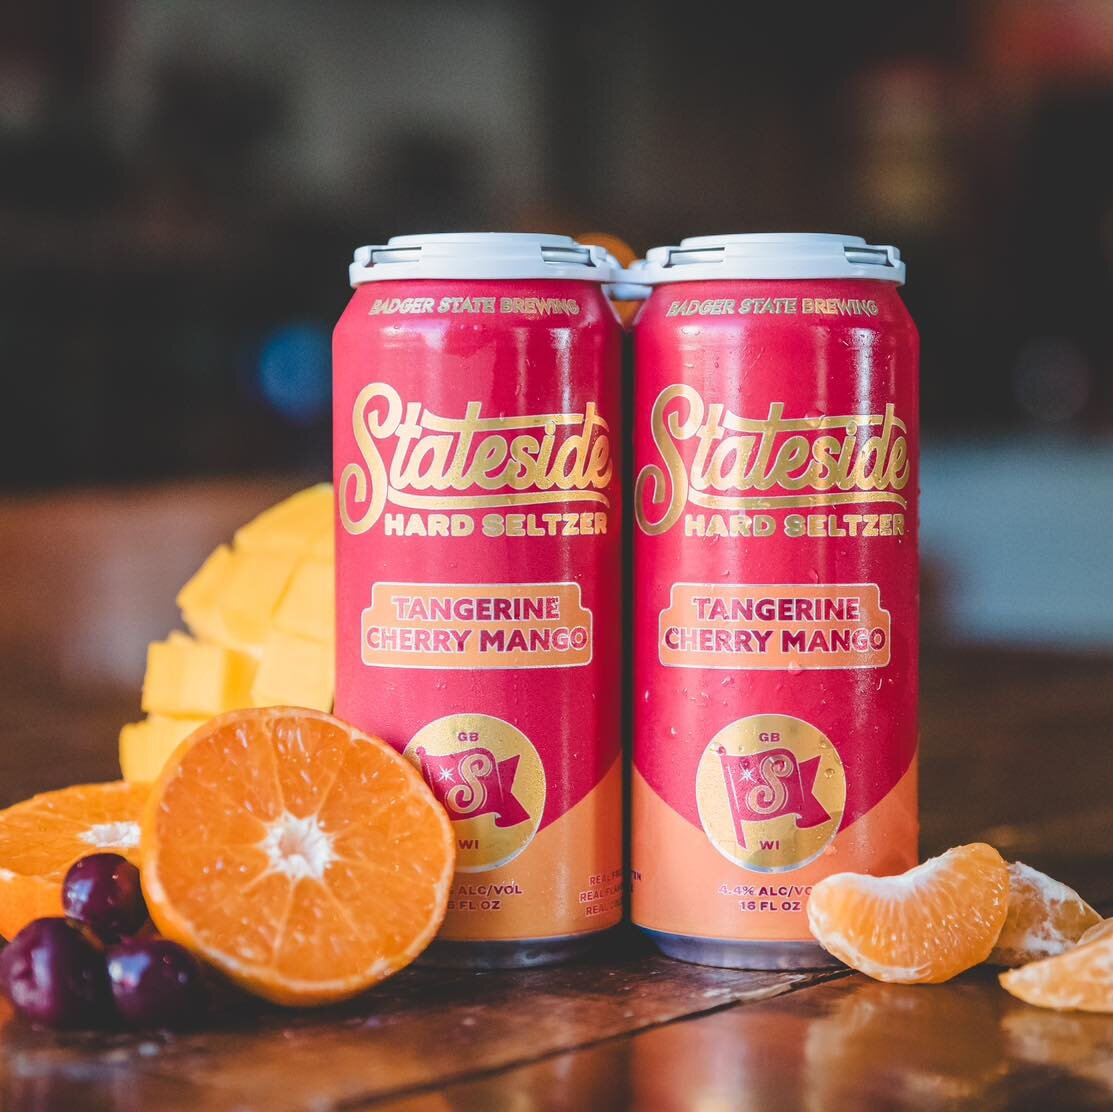 Have you had to try our latest flavor? 

This 4.4% hard seltzer is bursting with bright/fruity flavors of Tangerine, Cherry &amp; Mango that come fr real fruit and are sure to brighten up any day! 

Get some today.